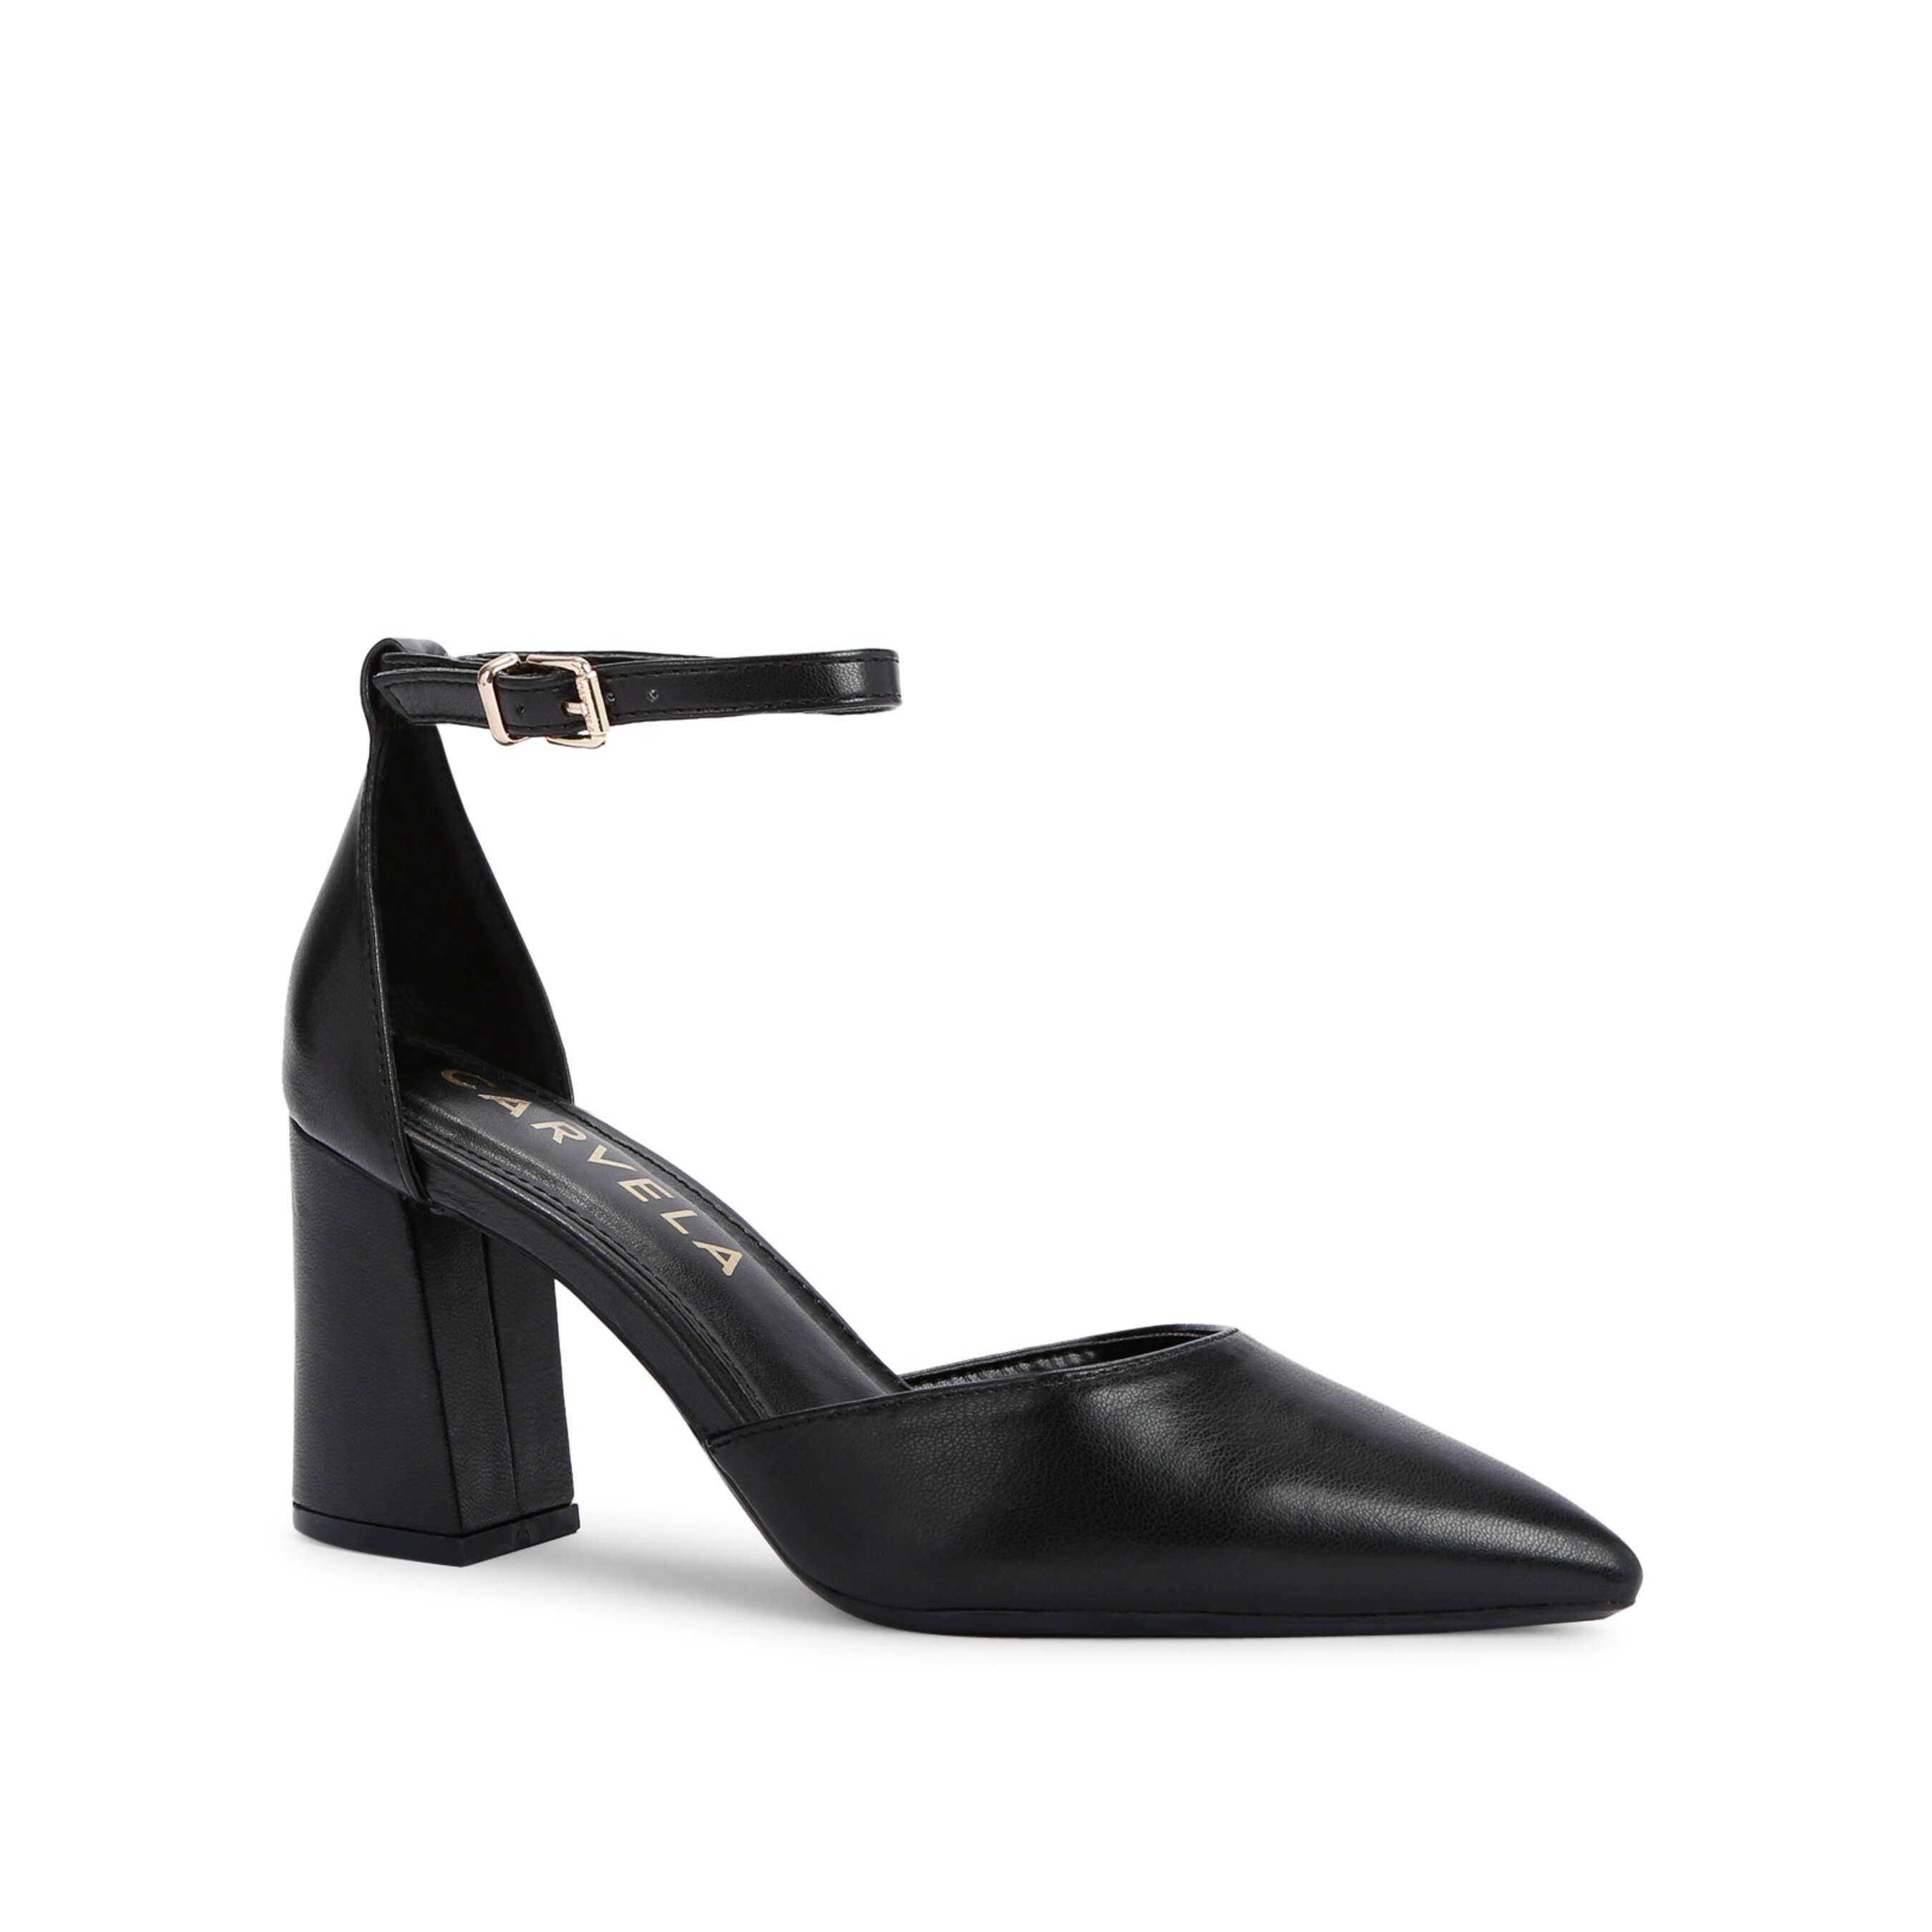 The Refined Court features a black upper with closed toe and single ankle strap. The strap is tied with golden buckle and the heel is in a block style. Heel height: 80mm.